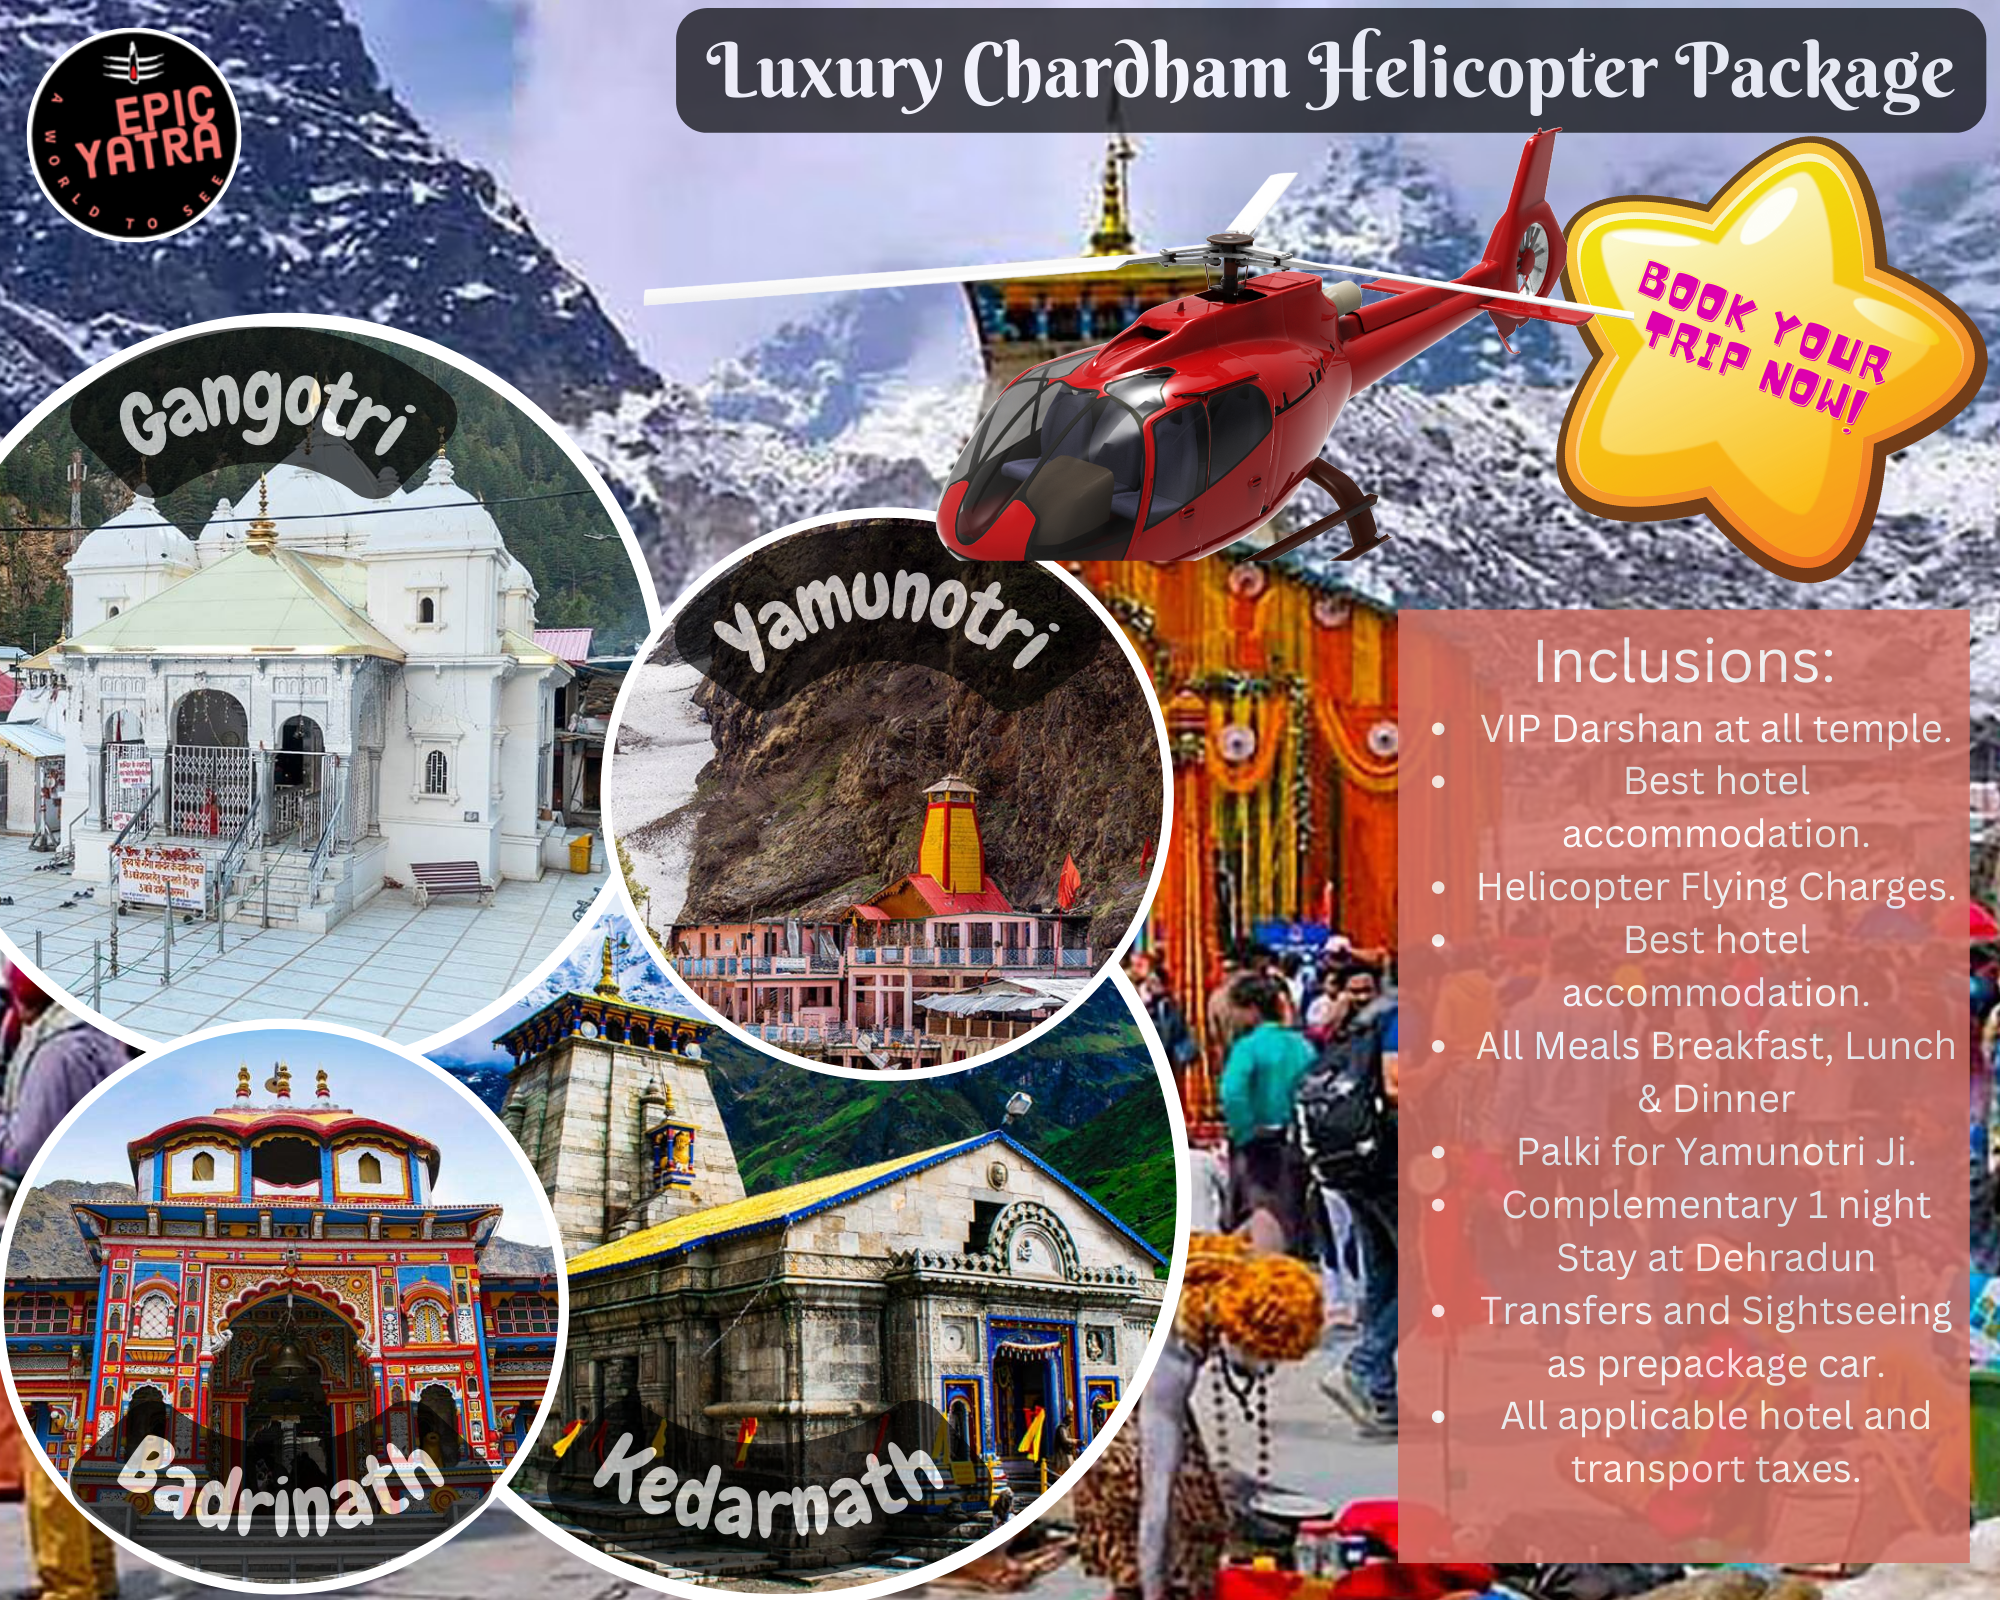 Luxury Char Dham by helicopter